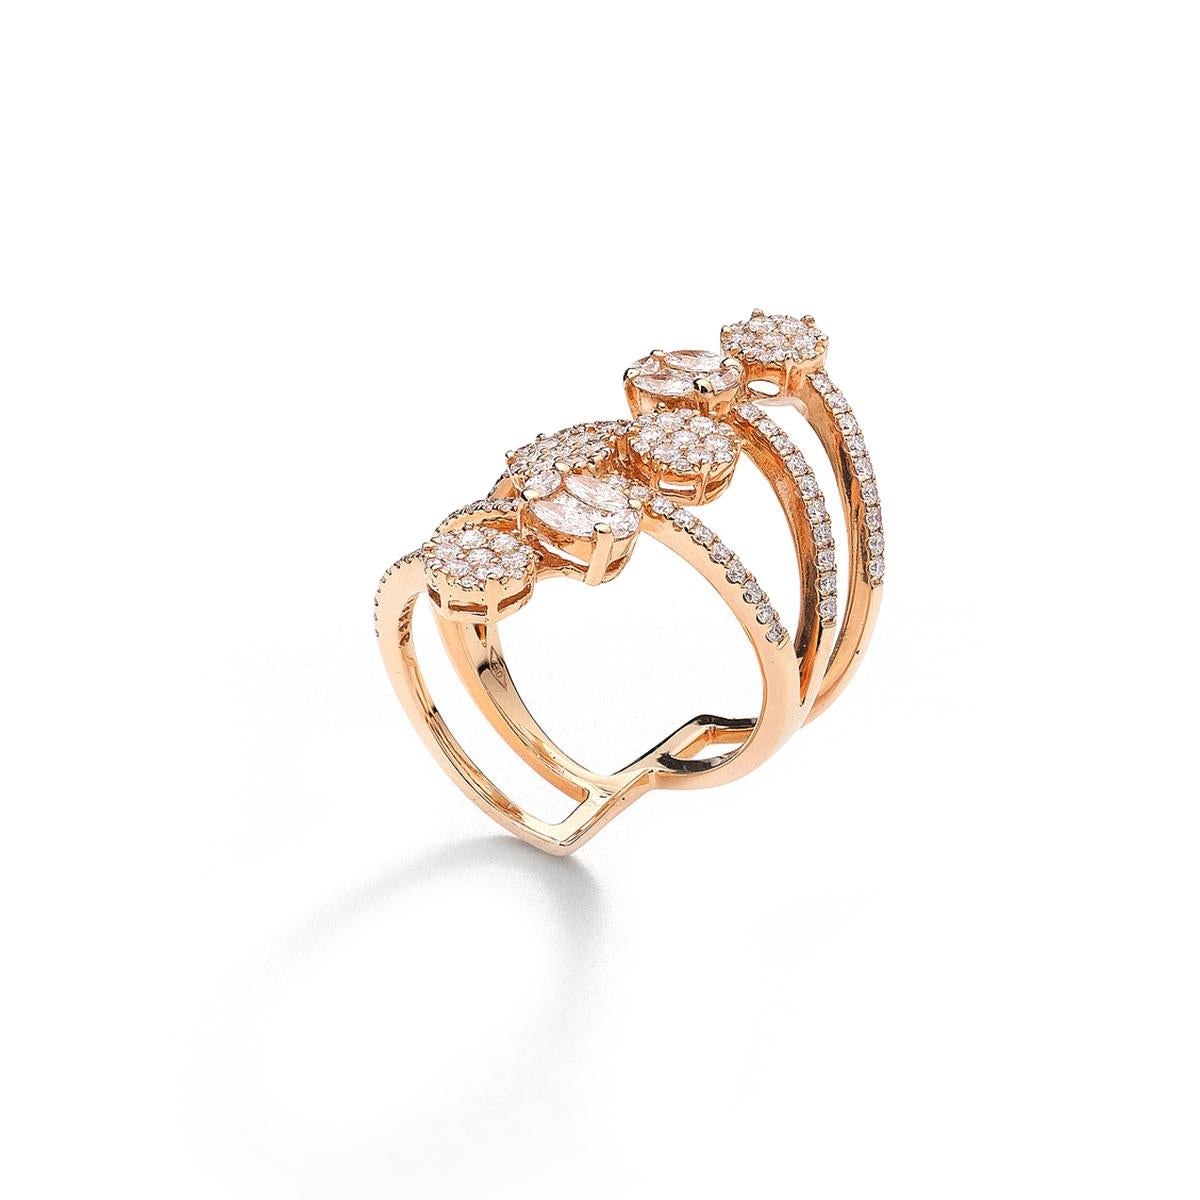 Ring in 18kt pink gold set with 10 marquise and princess cut diamonds  0.49 cts and 110 diamonds 1.03 cts Size 53